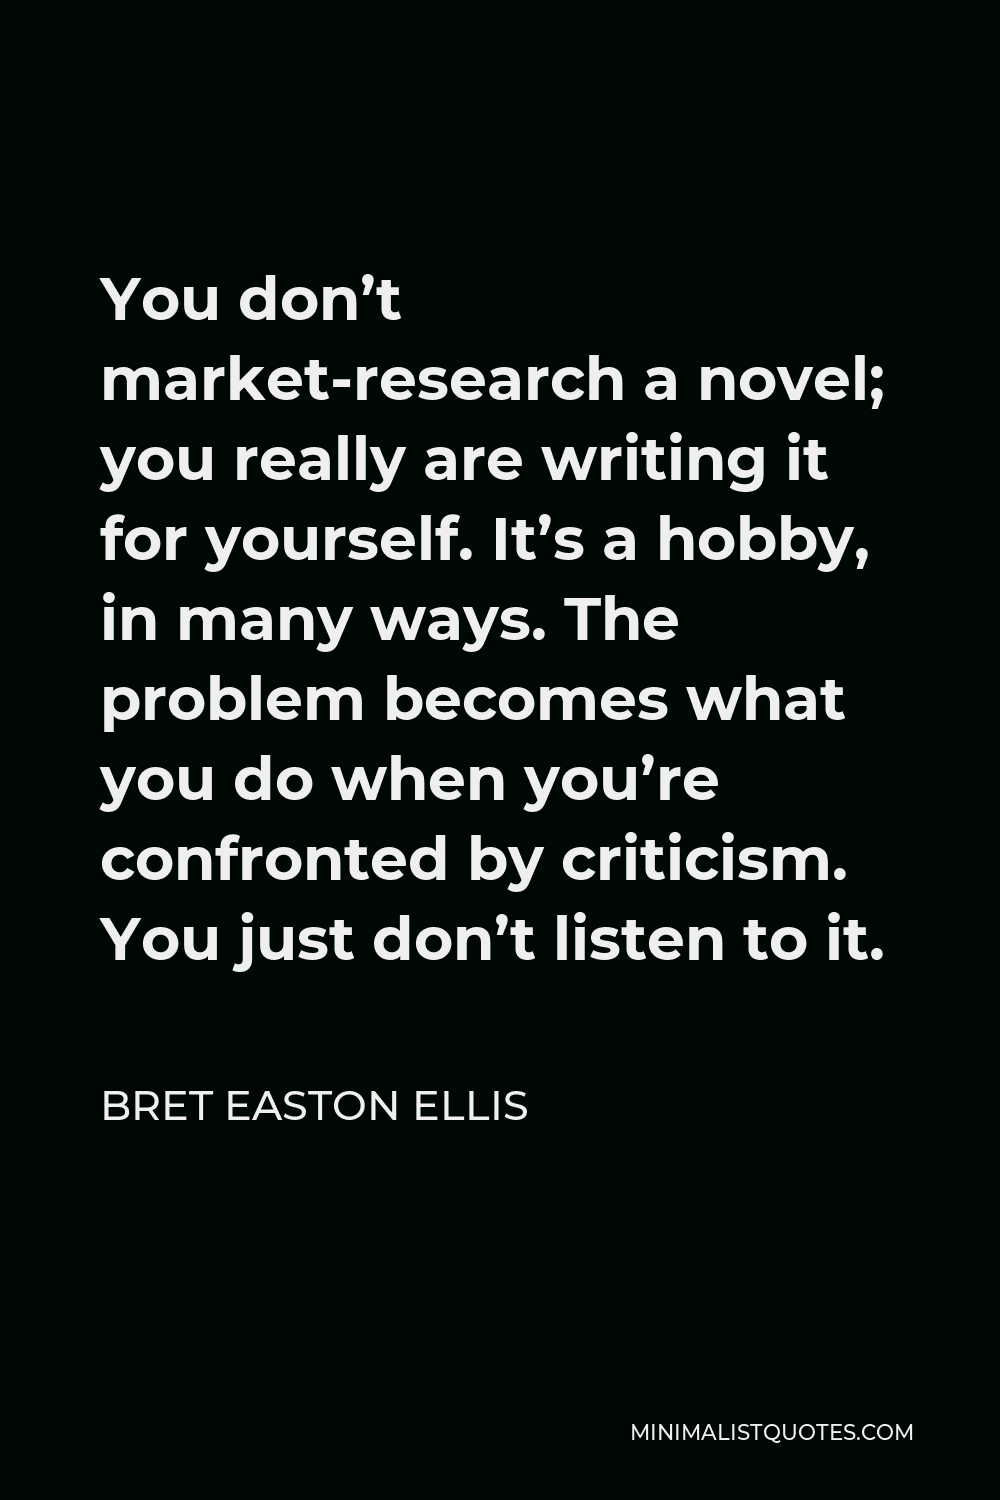 Bret Easton Ellis Quote - You don’t market-research a novel; you really are writing it for yourself. It’s a hobby, in many ways. The problem becomes what you do when you’re confronted by criticism. You just don’t listen to it.